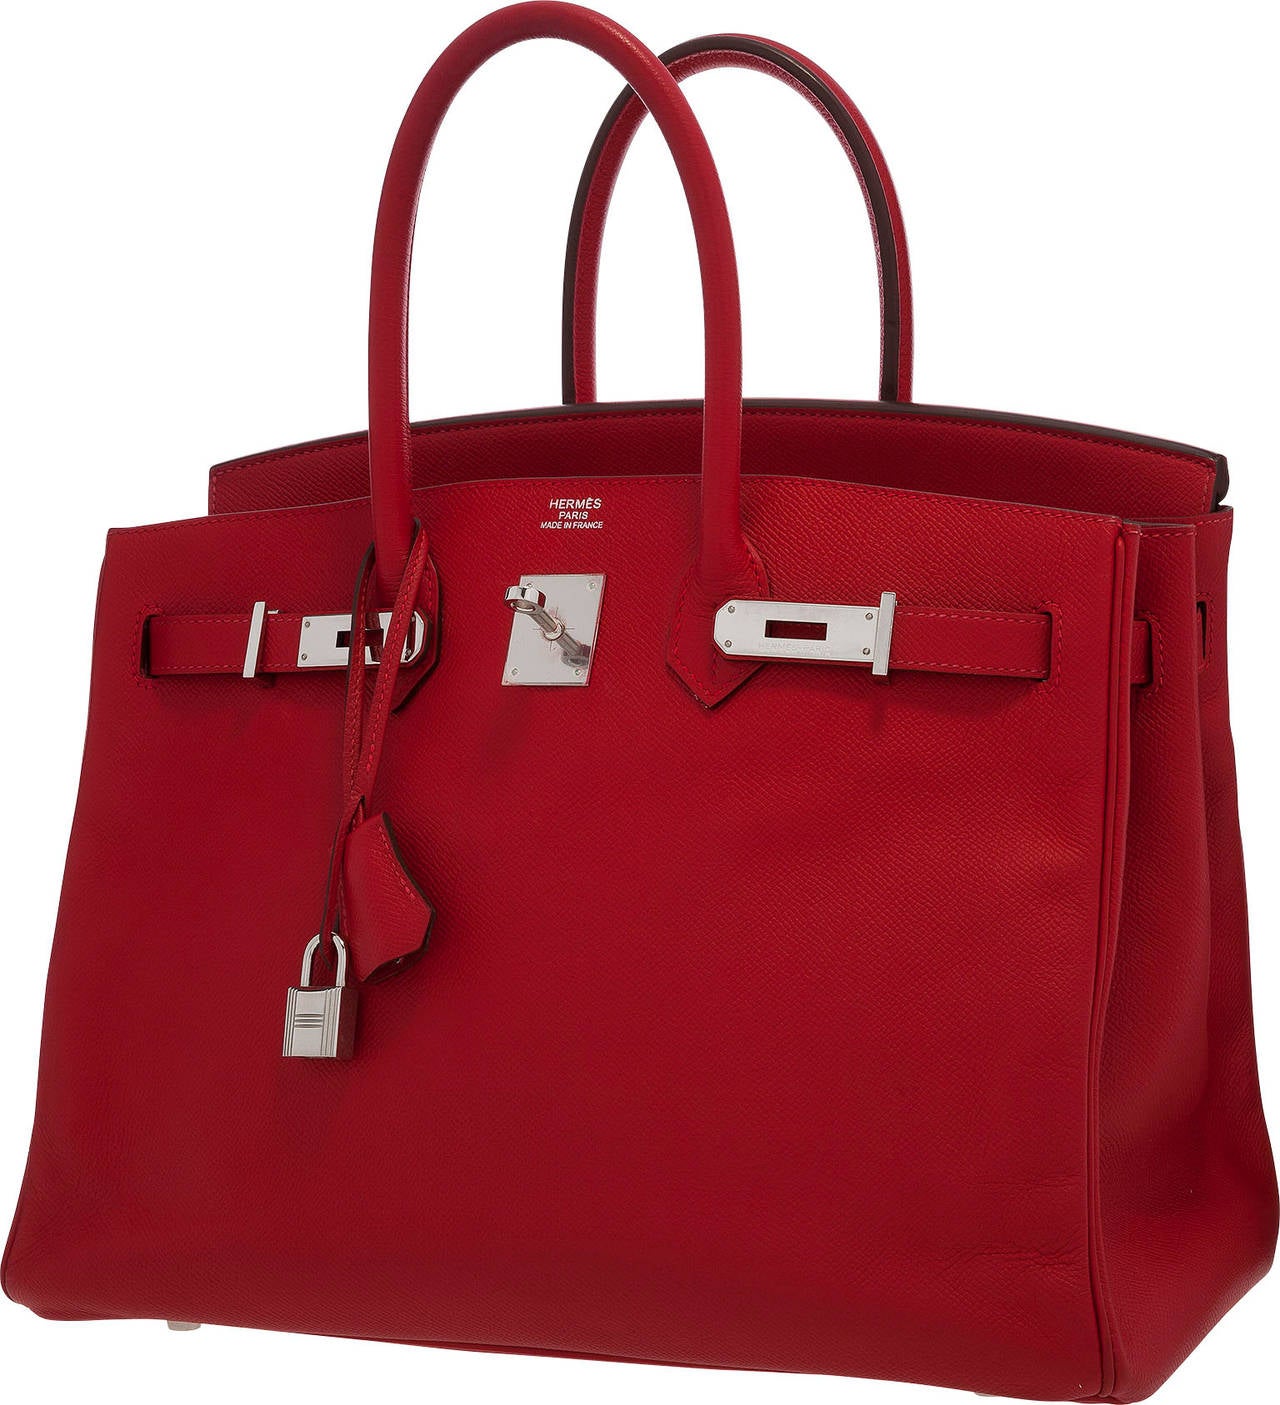 This classic Birkin Bag, done in a bright and fiery red coloration, is the perfect way to add a fun elegant piece to any wardrobe. Done in Rouge Casaque Epsom Leather, this bag will not blend into the droll. This bag features Palladium Hardware, two